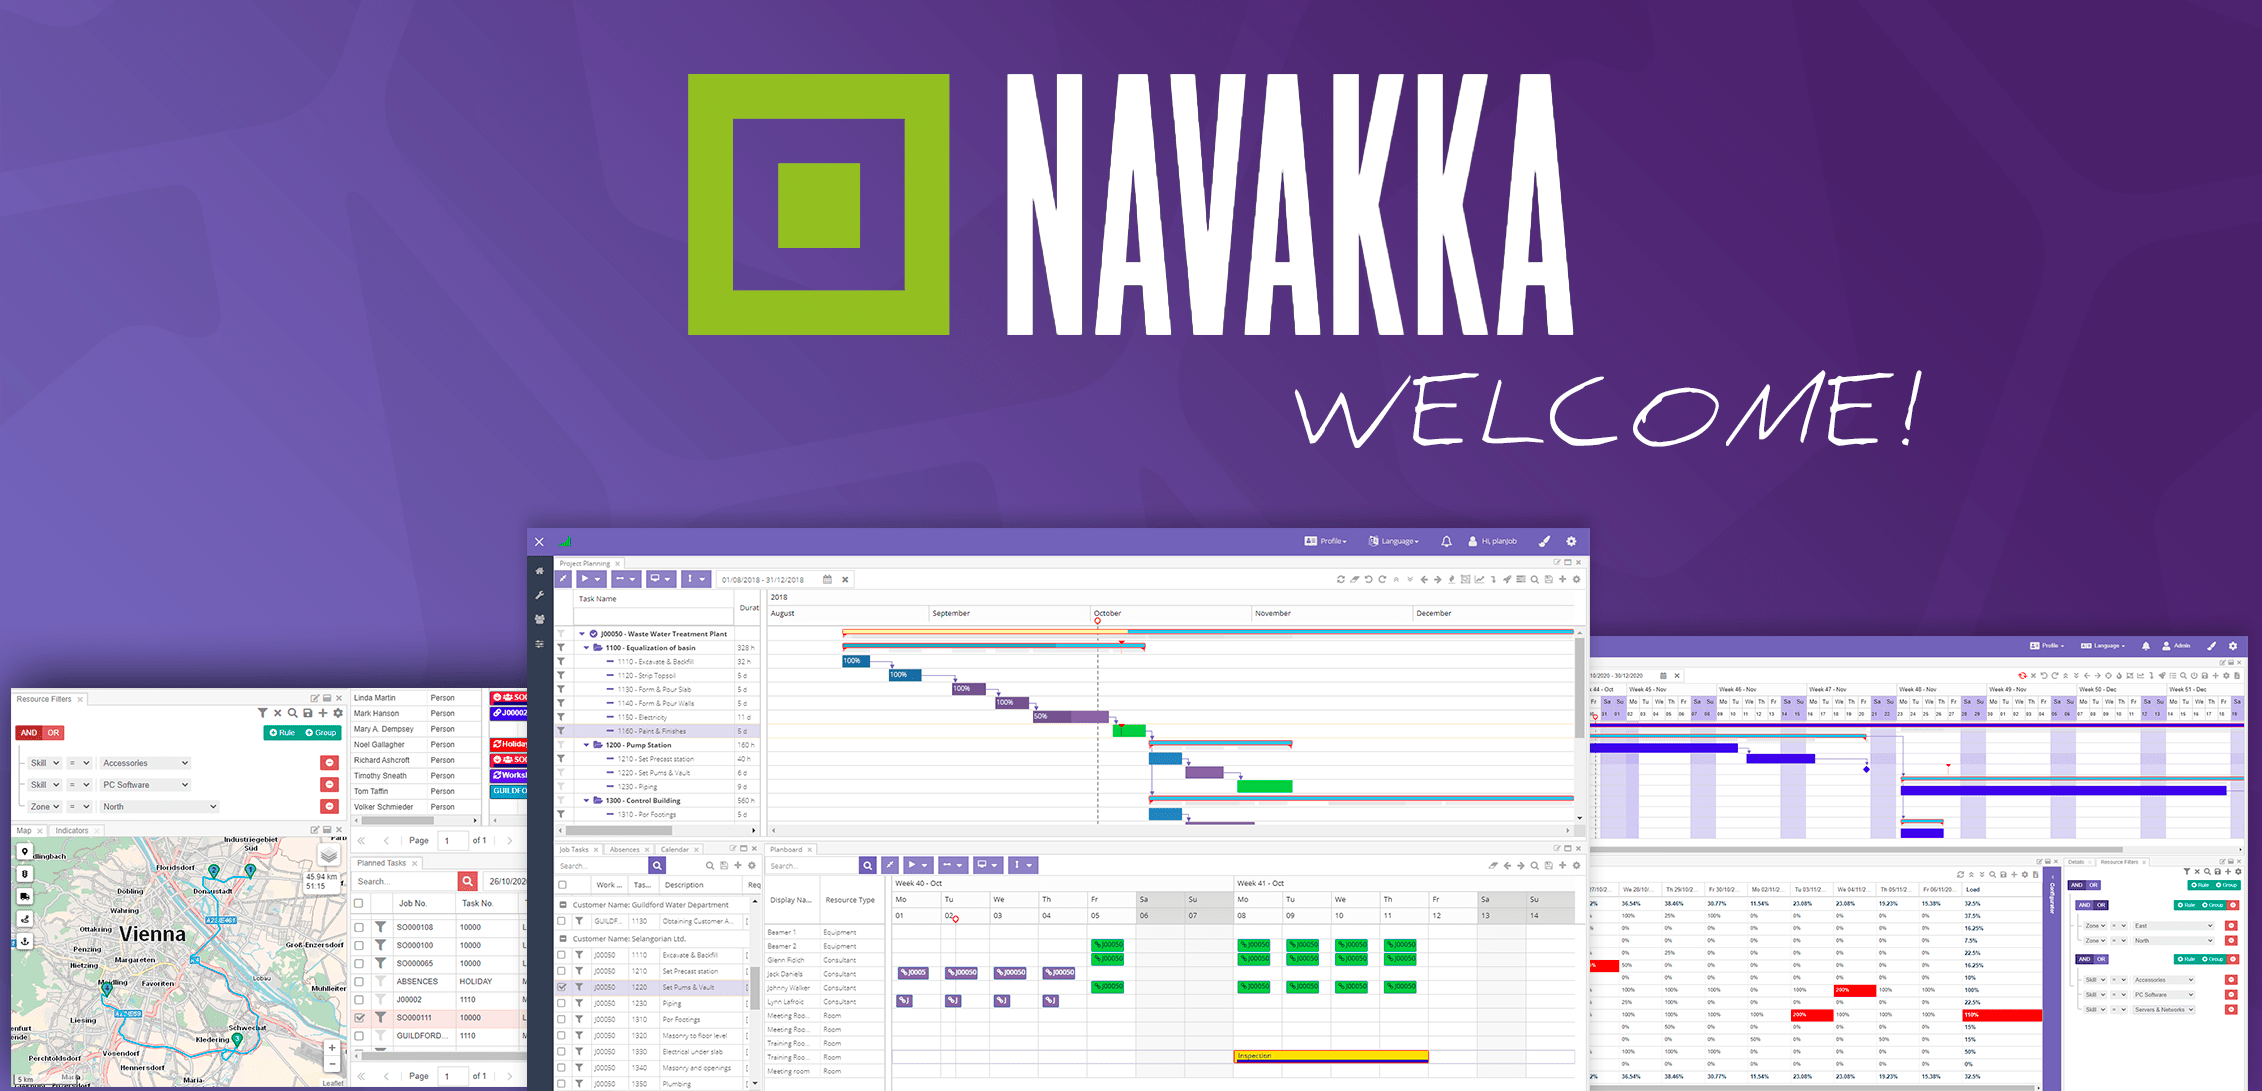 ds-reseller-navakka-welcome.png